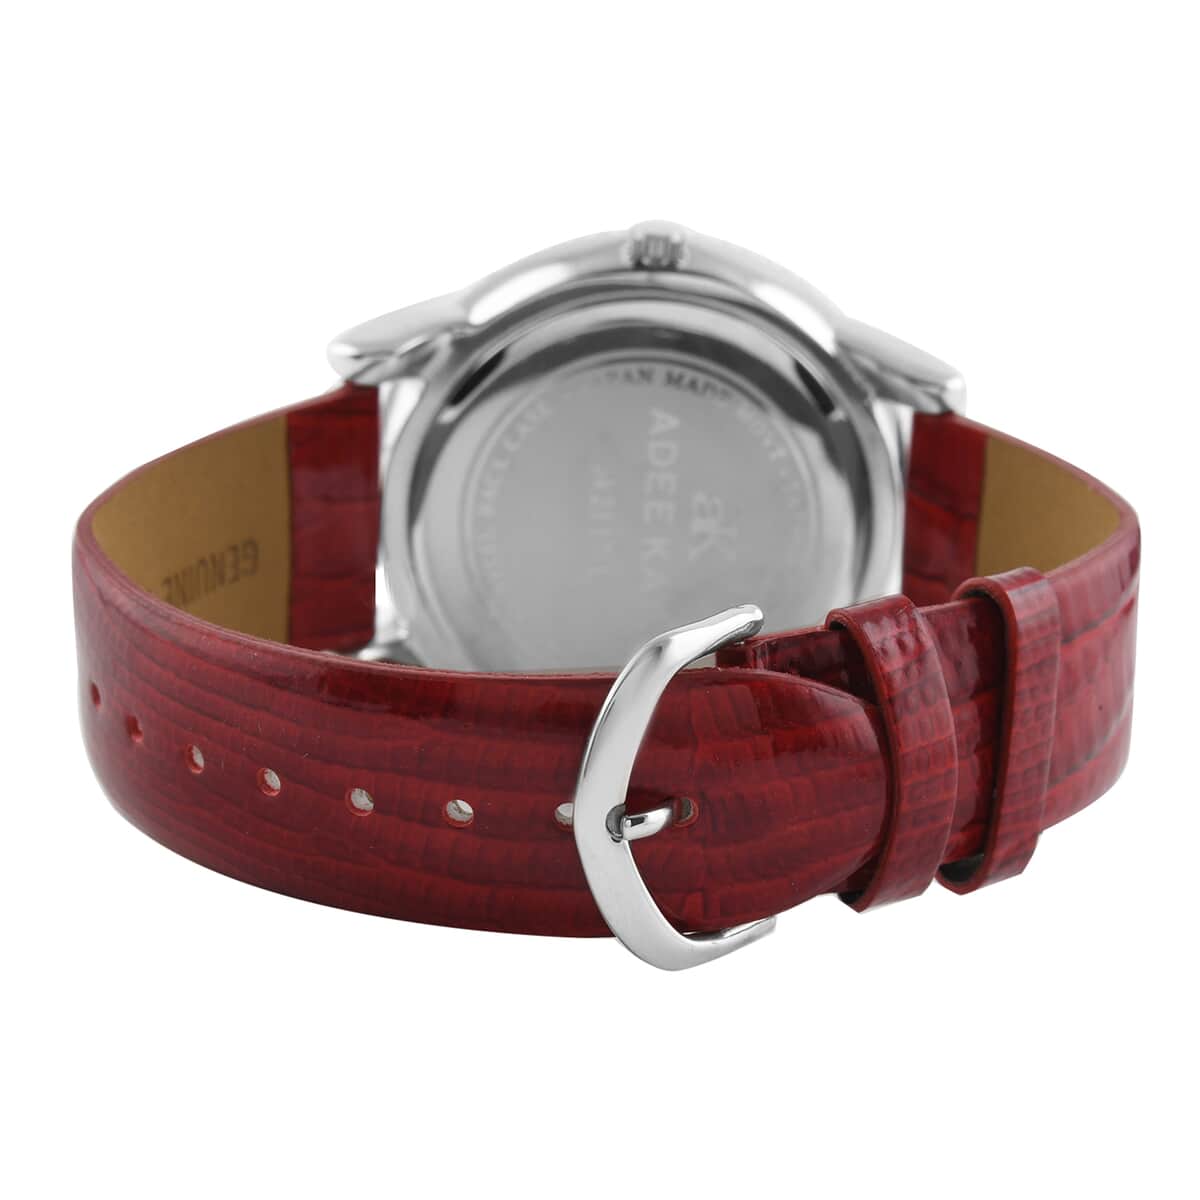 ADEE KAYE Bello Austrian Crystal Japanese Movement Watch with Genuine Leather Strap in Red (43mm) | Best Leather Watch for Women | Designer Women's Wrist Watch image number 3